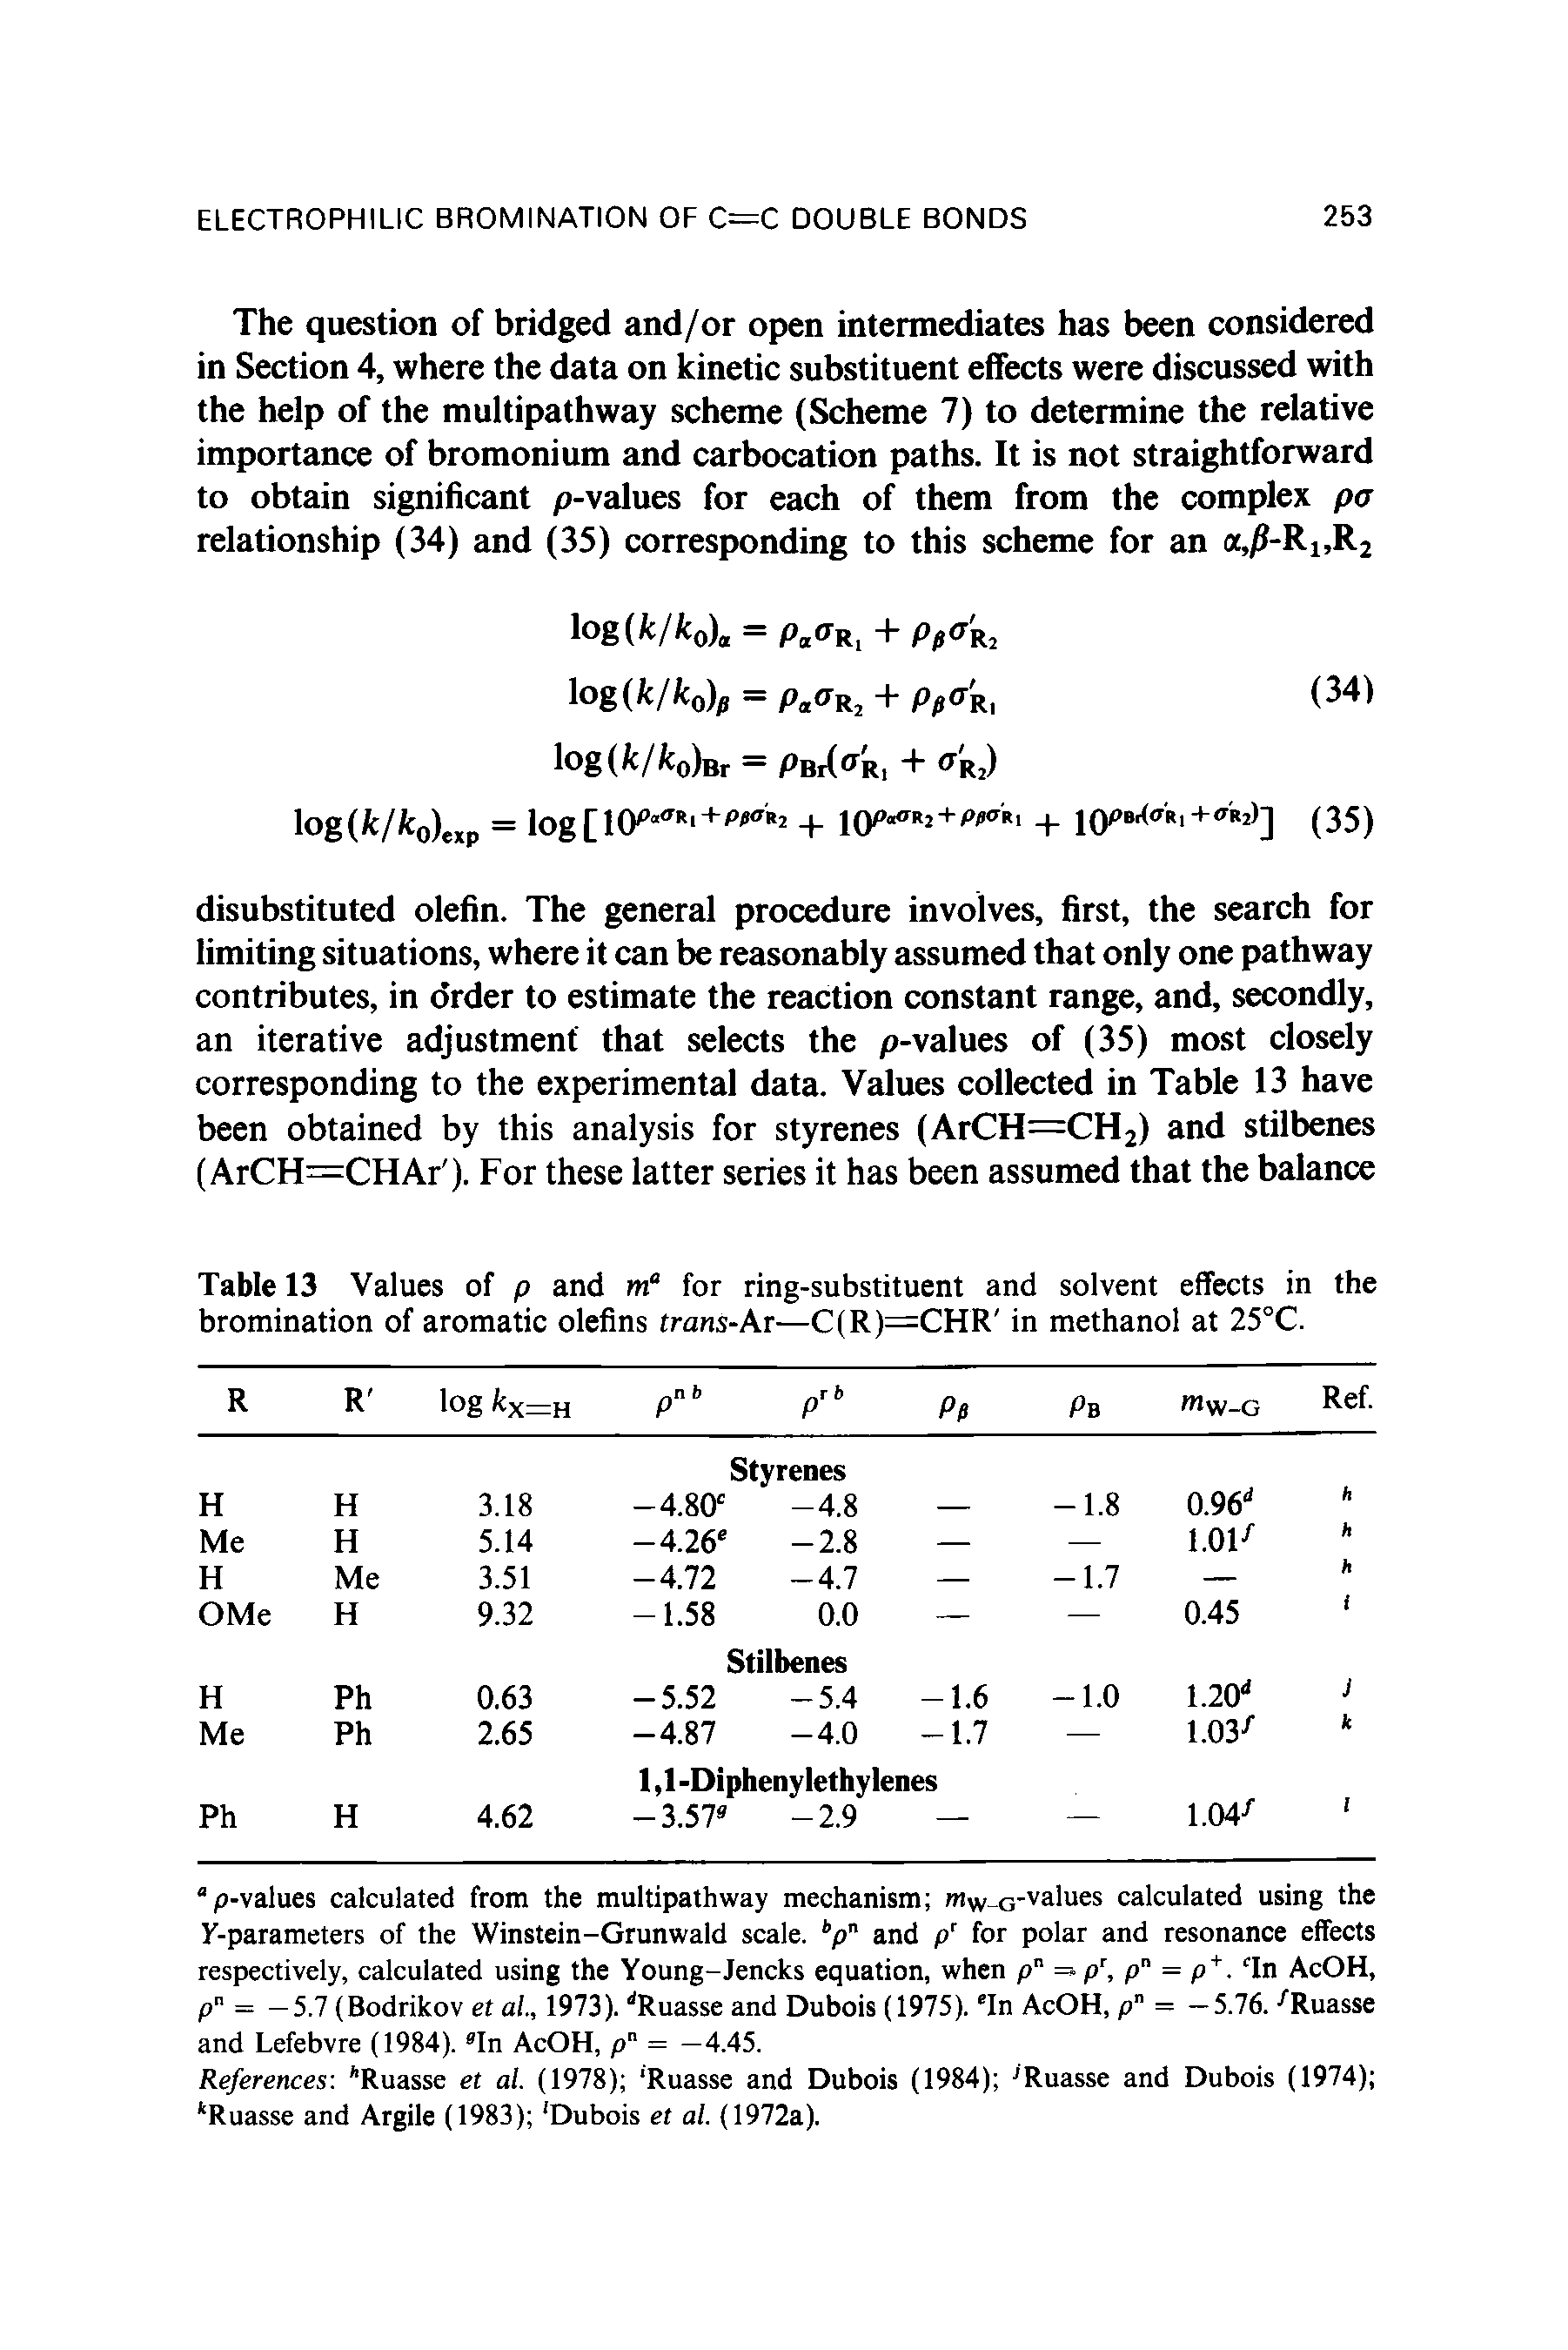 Table 13 Values of p and m for ring-substituent and solvent effects in the bromination of aromatic olefins trans-Ar—C(R)=CHR in methanol at 25°C.